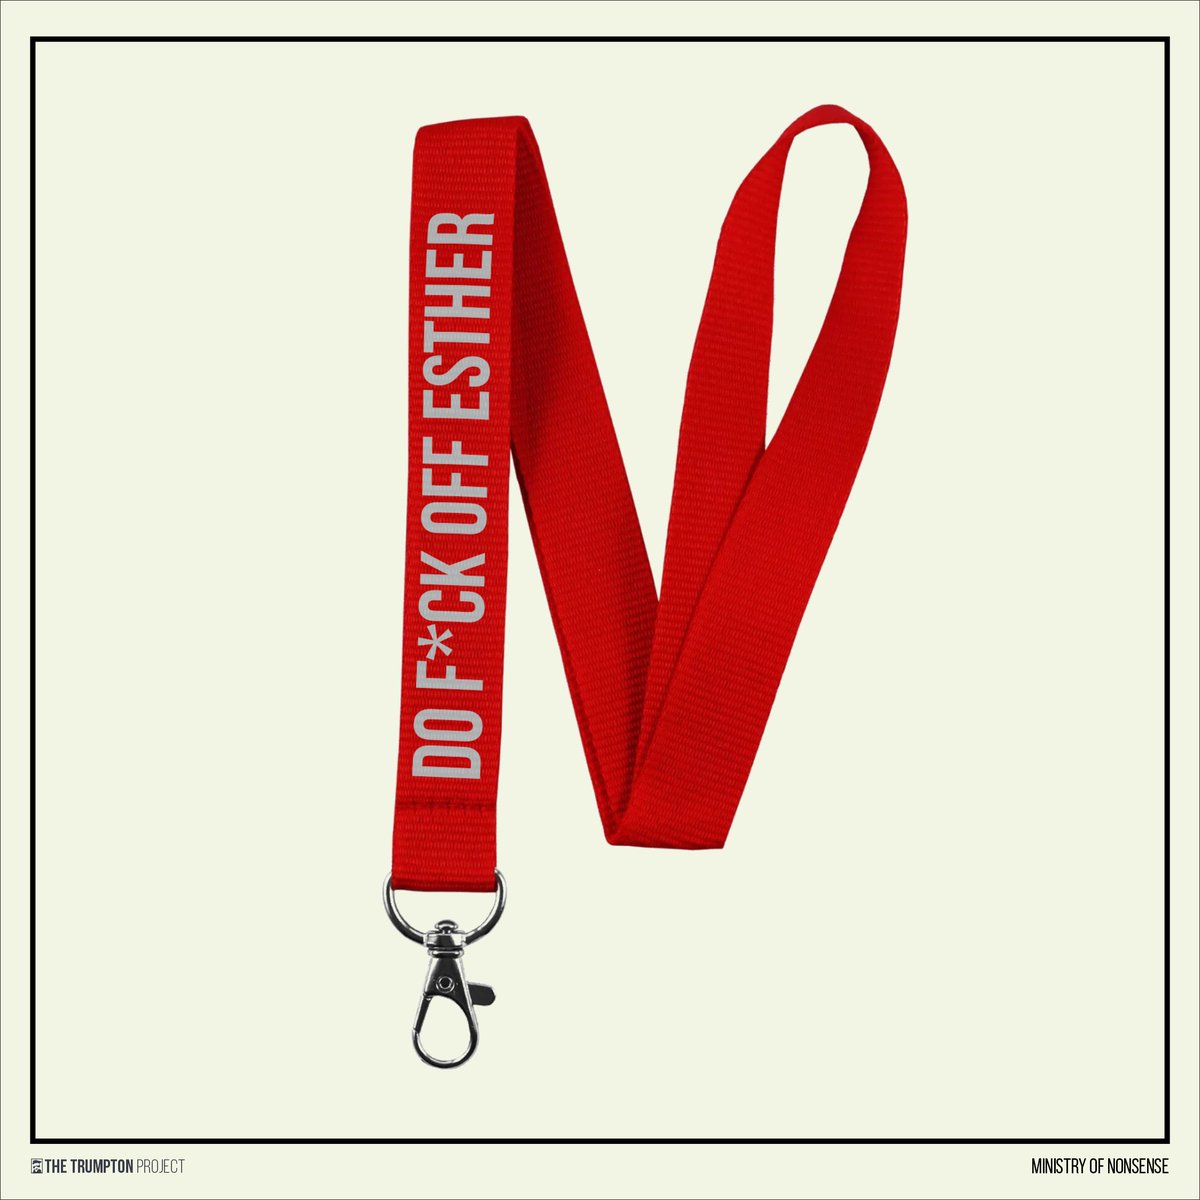 New #Lanyards available for Ministry of Nonsense staff